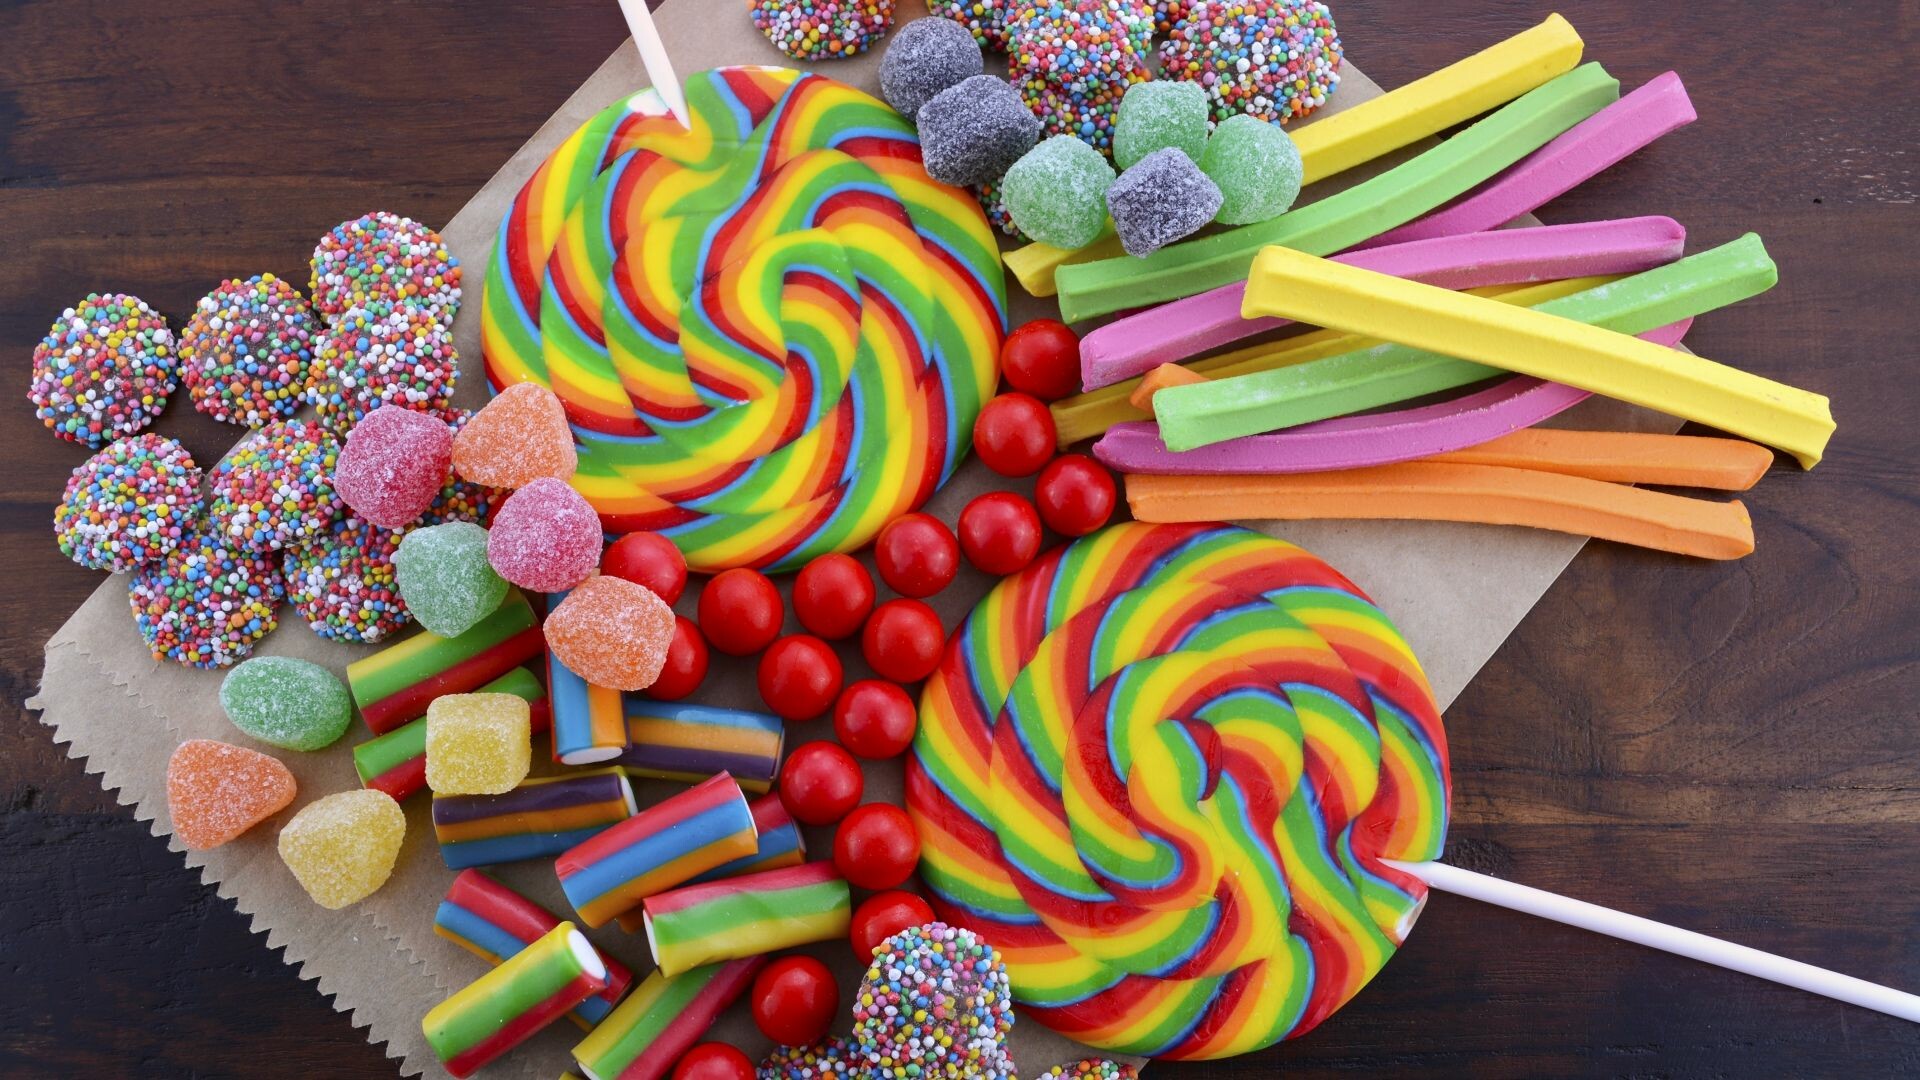 Colorful candies sweets wallpaper, Vibrant confections, Eye-catching colors, Sweet temptation, 1920x1080 Full HD Desktop